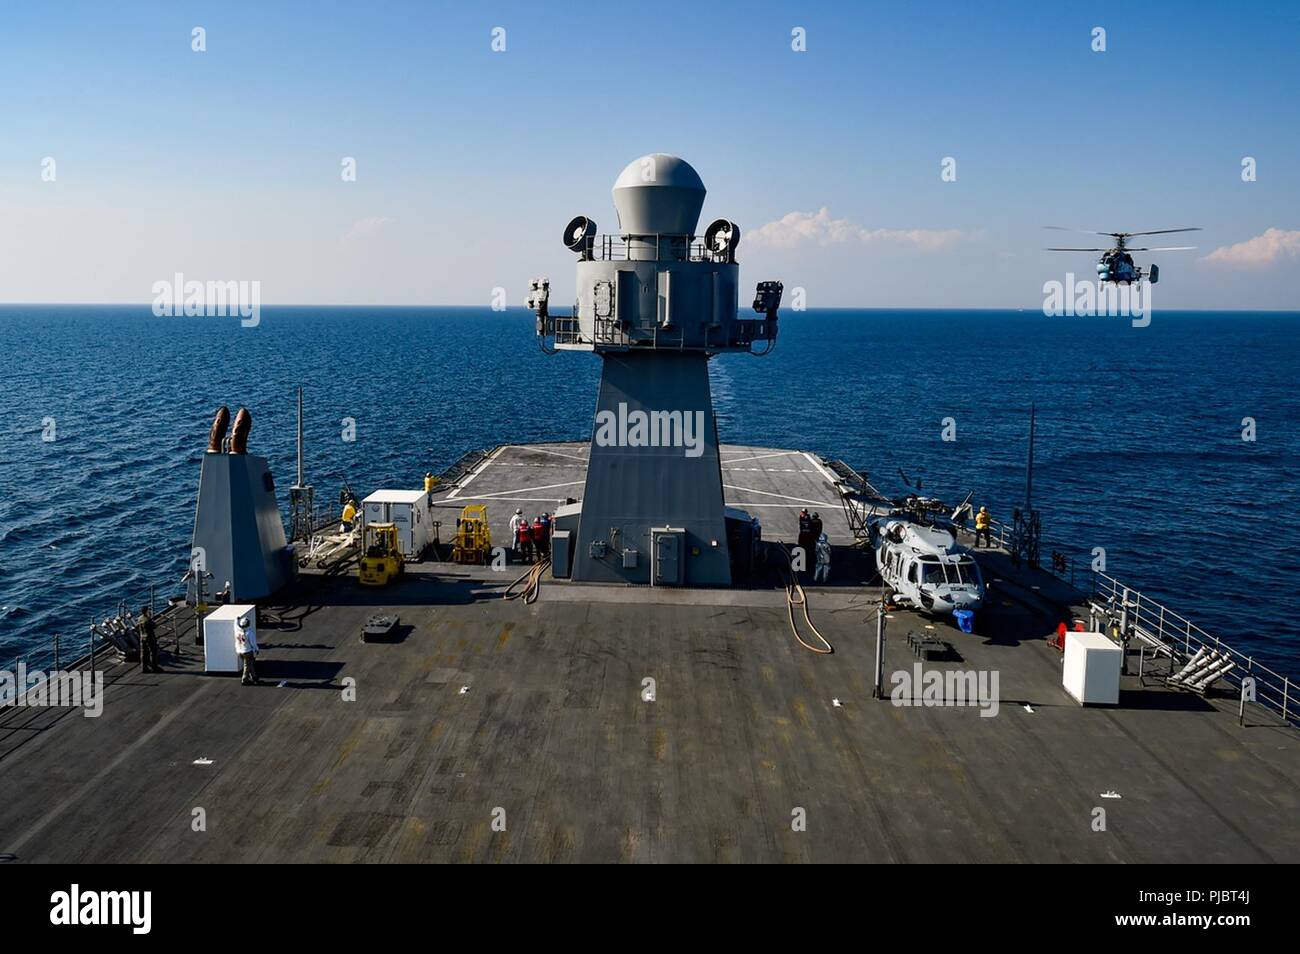 BLACK SEA (July 11, 2018) A Ukrainian Ka-27 helicopter prepares to land aboard the Blue Ridge-class command and control ship USS Mount Whitney (LCC 20) in the Black Sea during exercise Sea Breeze 2018, July 11. Sea Breeze is a U.S. and Ukraine co-hosted multinational maritime exercise held in the Black Sea and is designed to enhance interoperability of participating nations and strengthen Maritime security within the region. Stock Photo